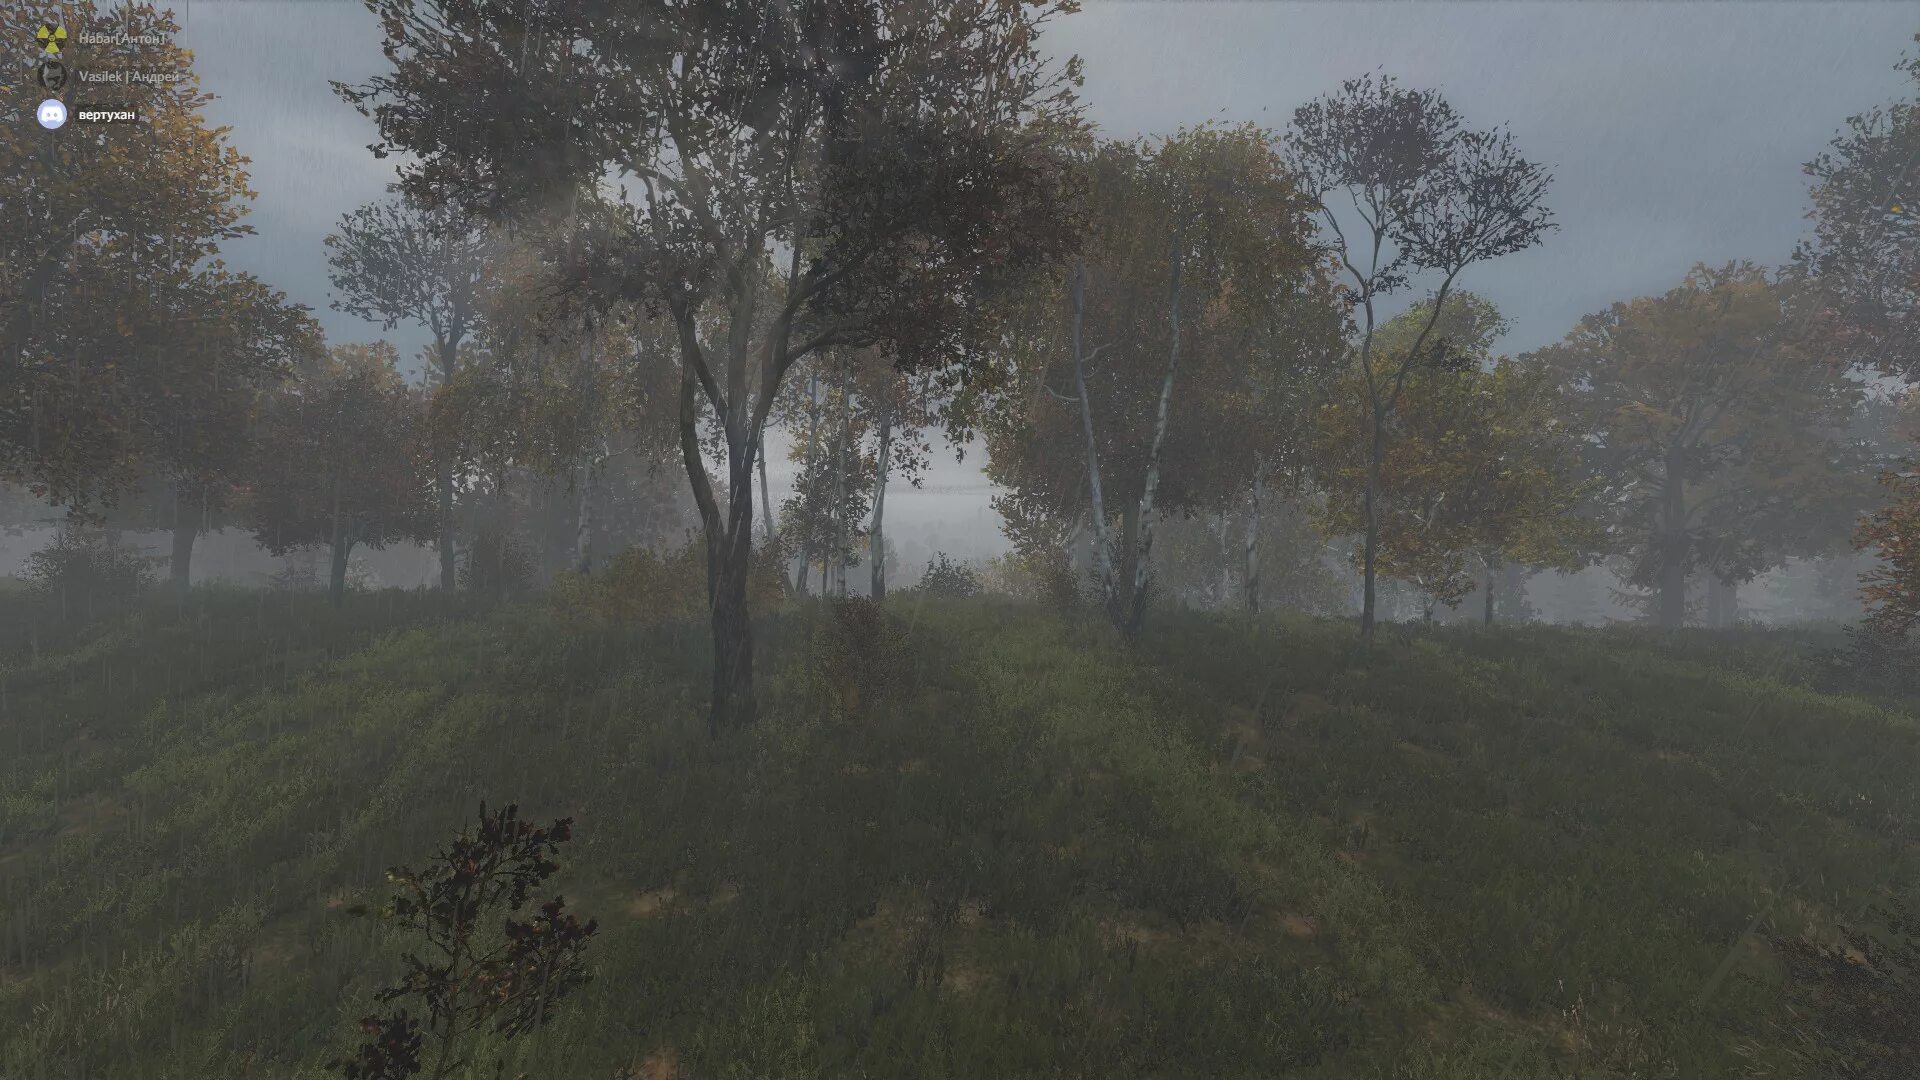 Сталкер DAYZ area of Decay. Area of Decay Map DAYZ Stalker. Карта DAYZ Stalker area of Decay. DAYZ area of Decay карта местности. Dayz area